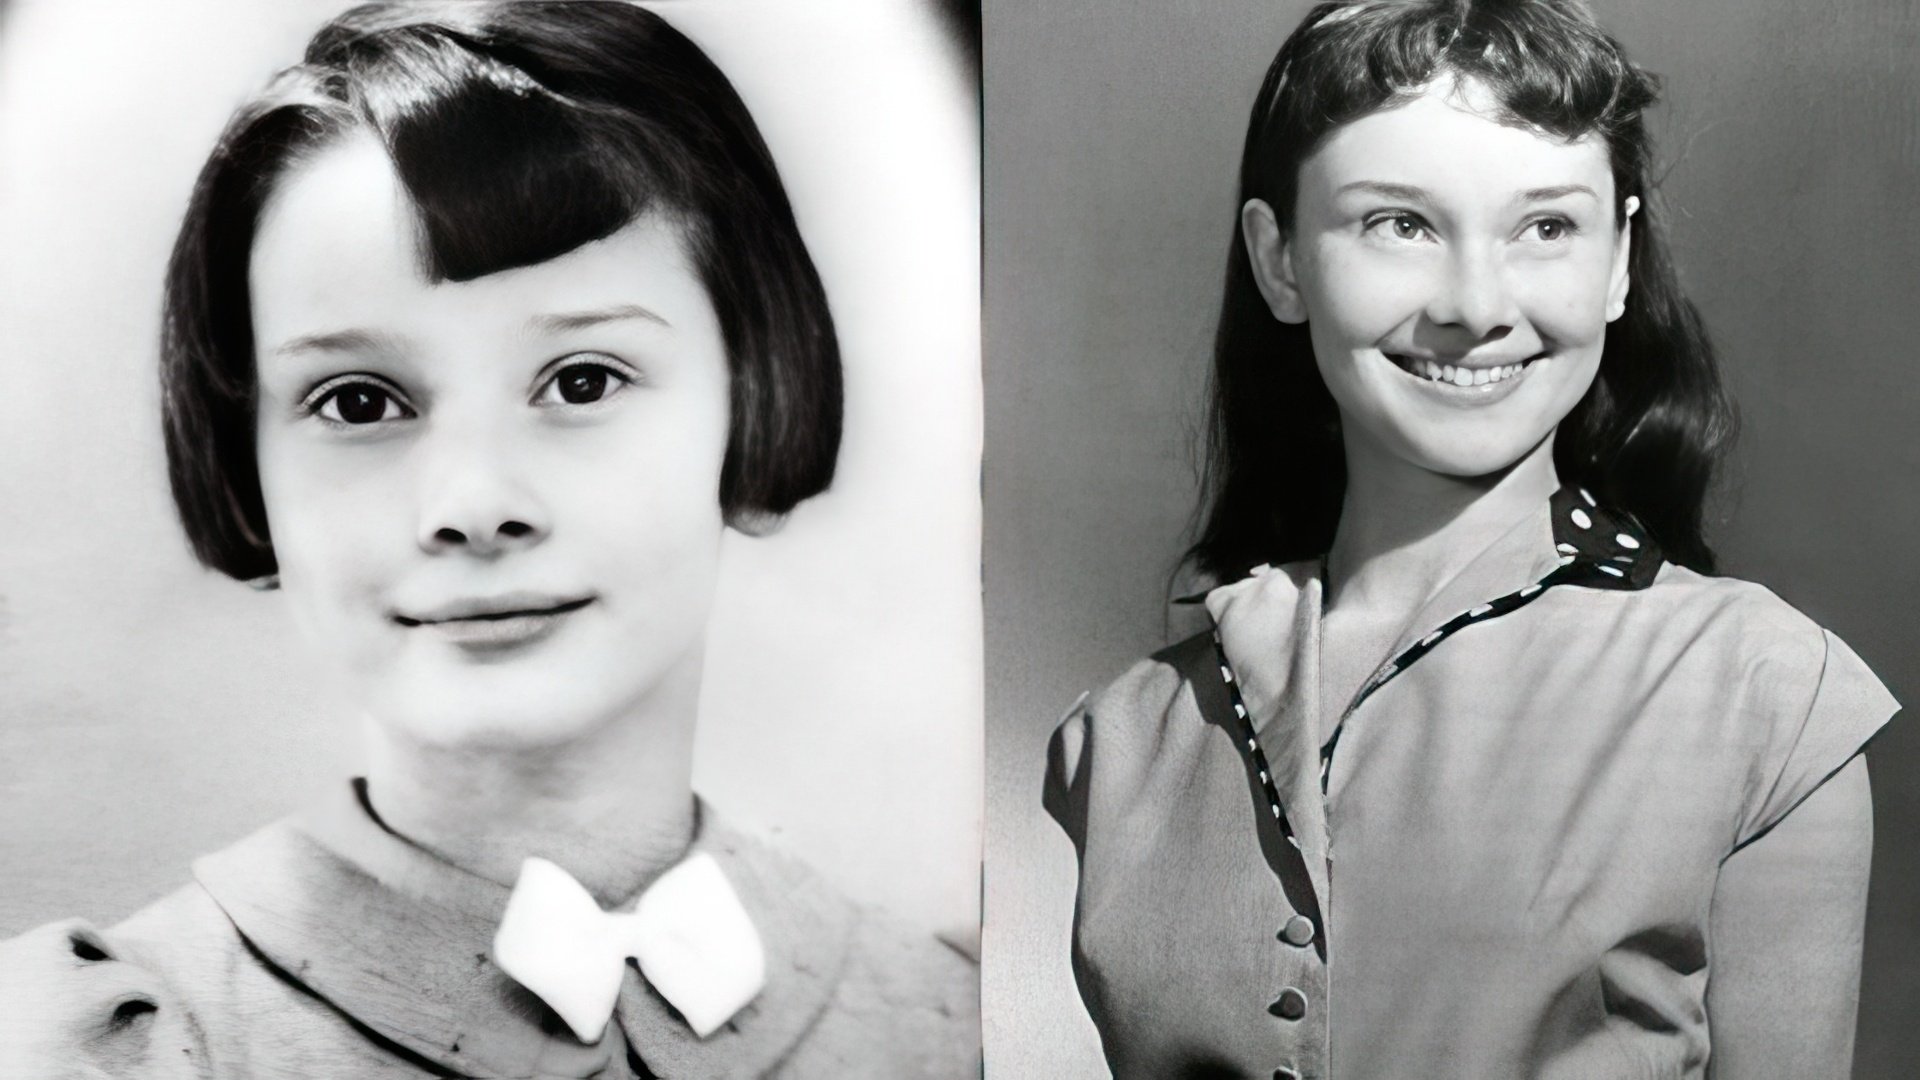 Audrey Hepburn in childhood and youth